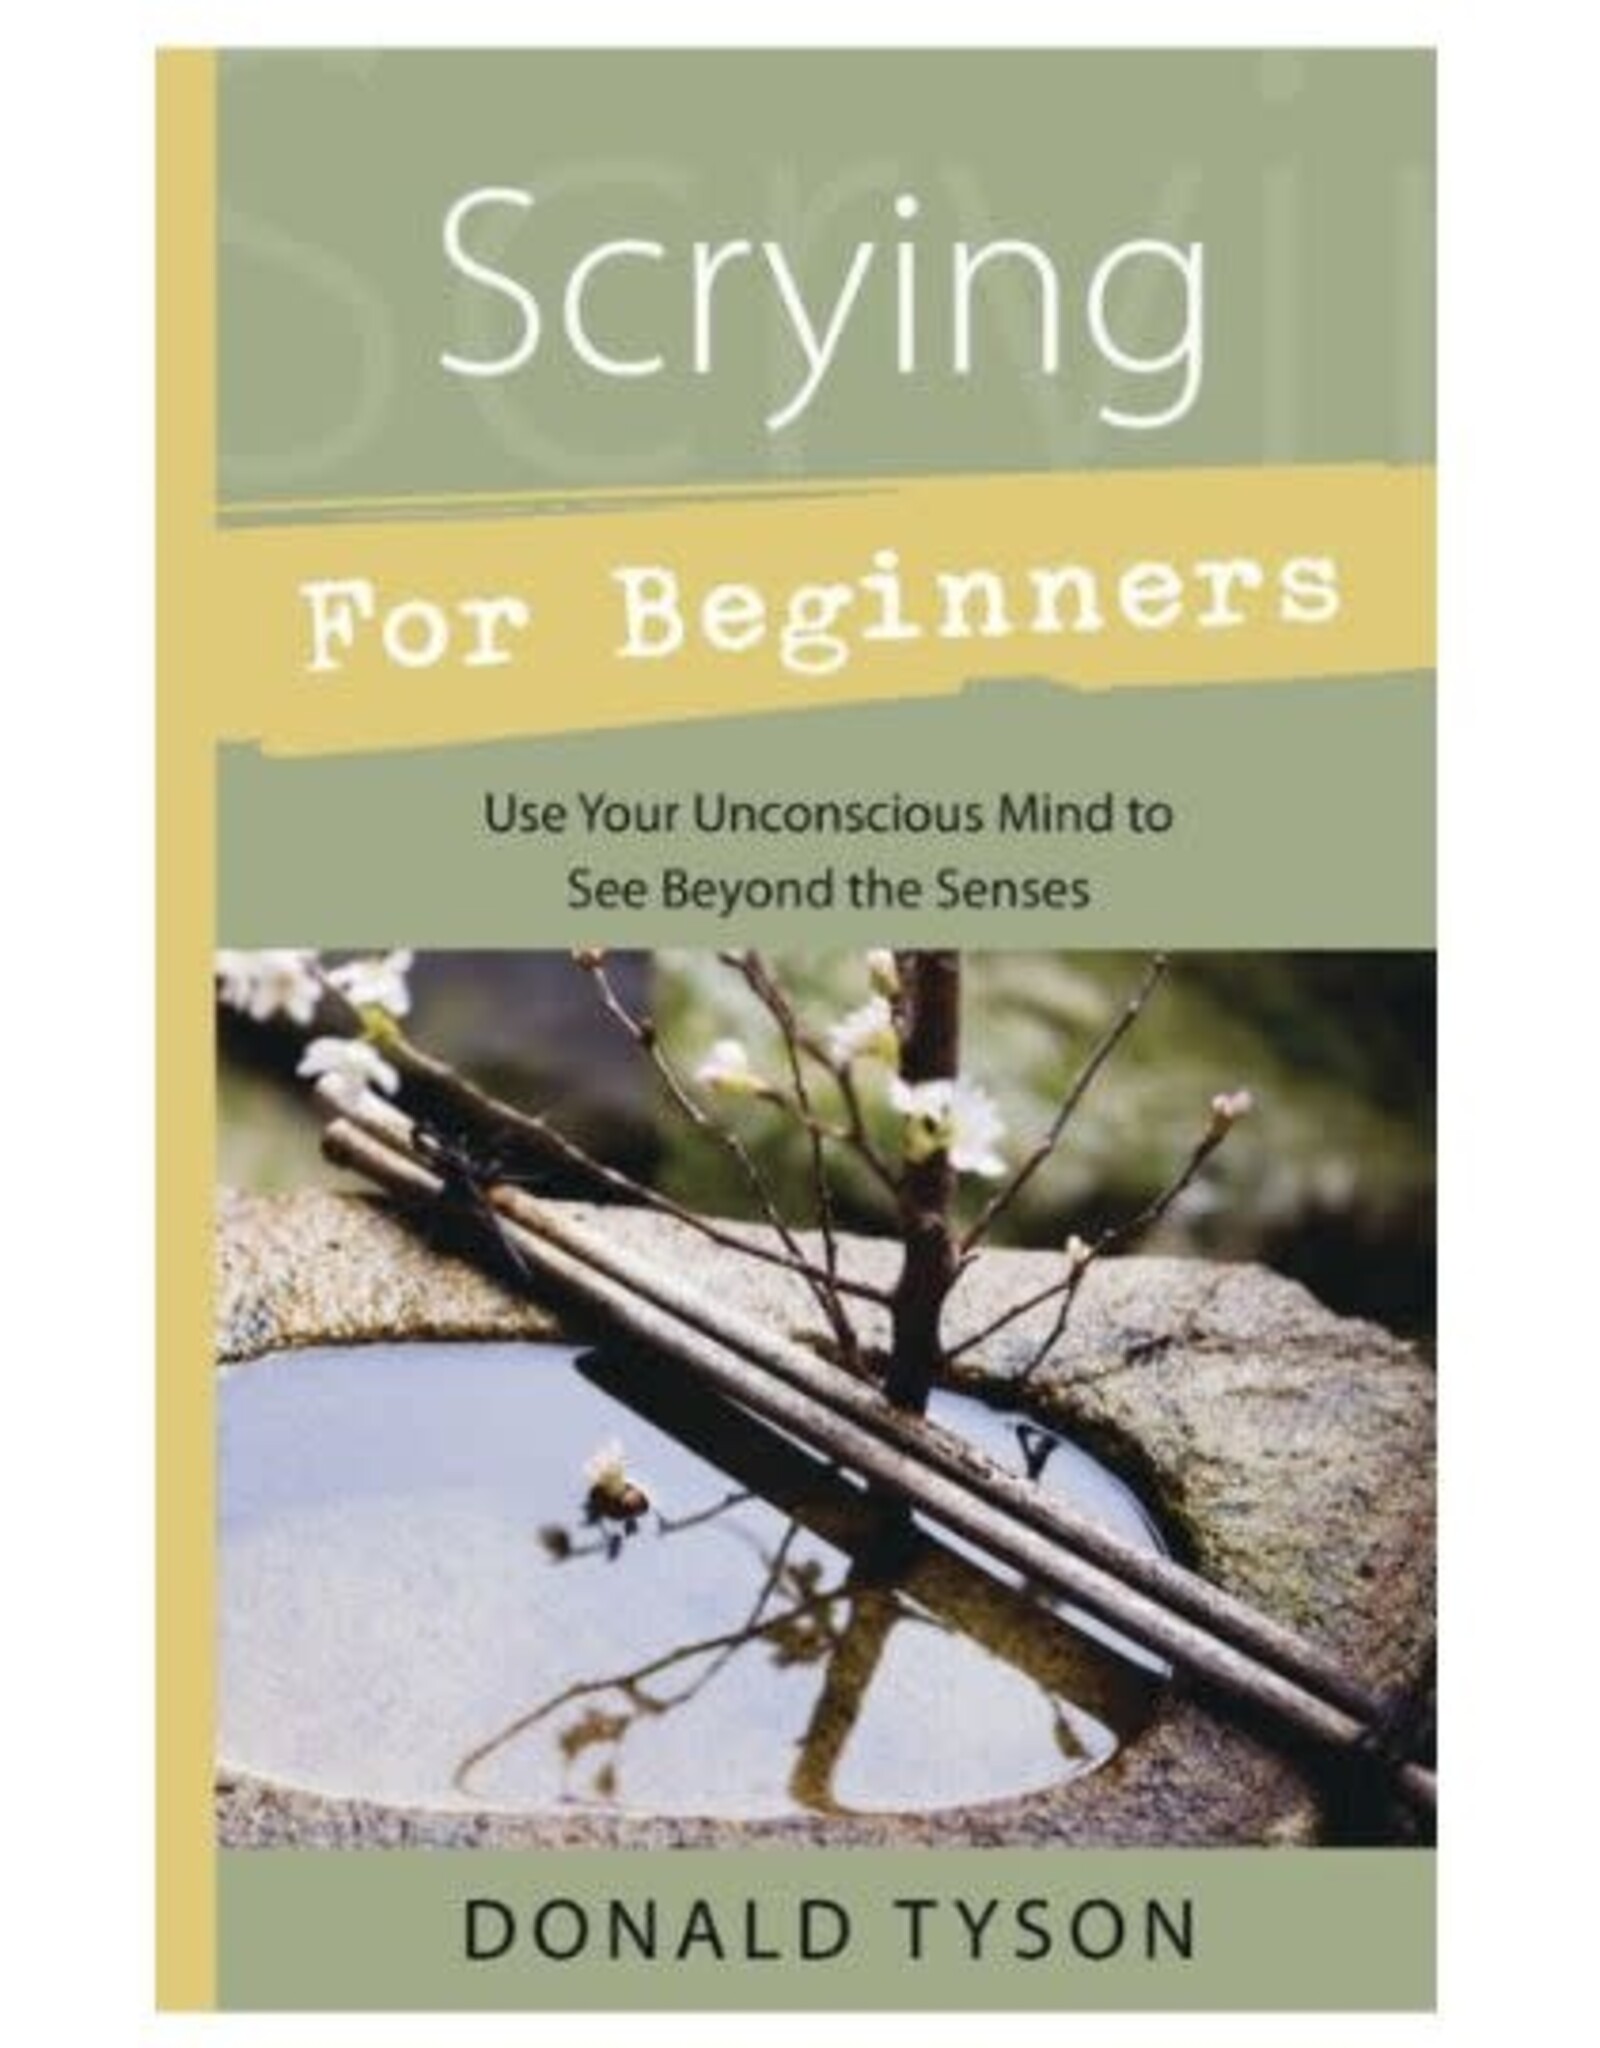 Donald Tyson Scrying for Beginners by Donald Tyson